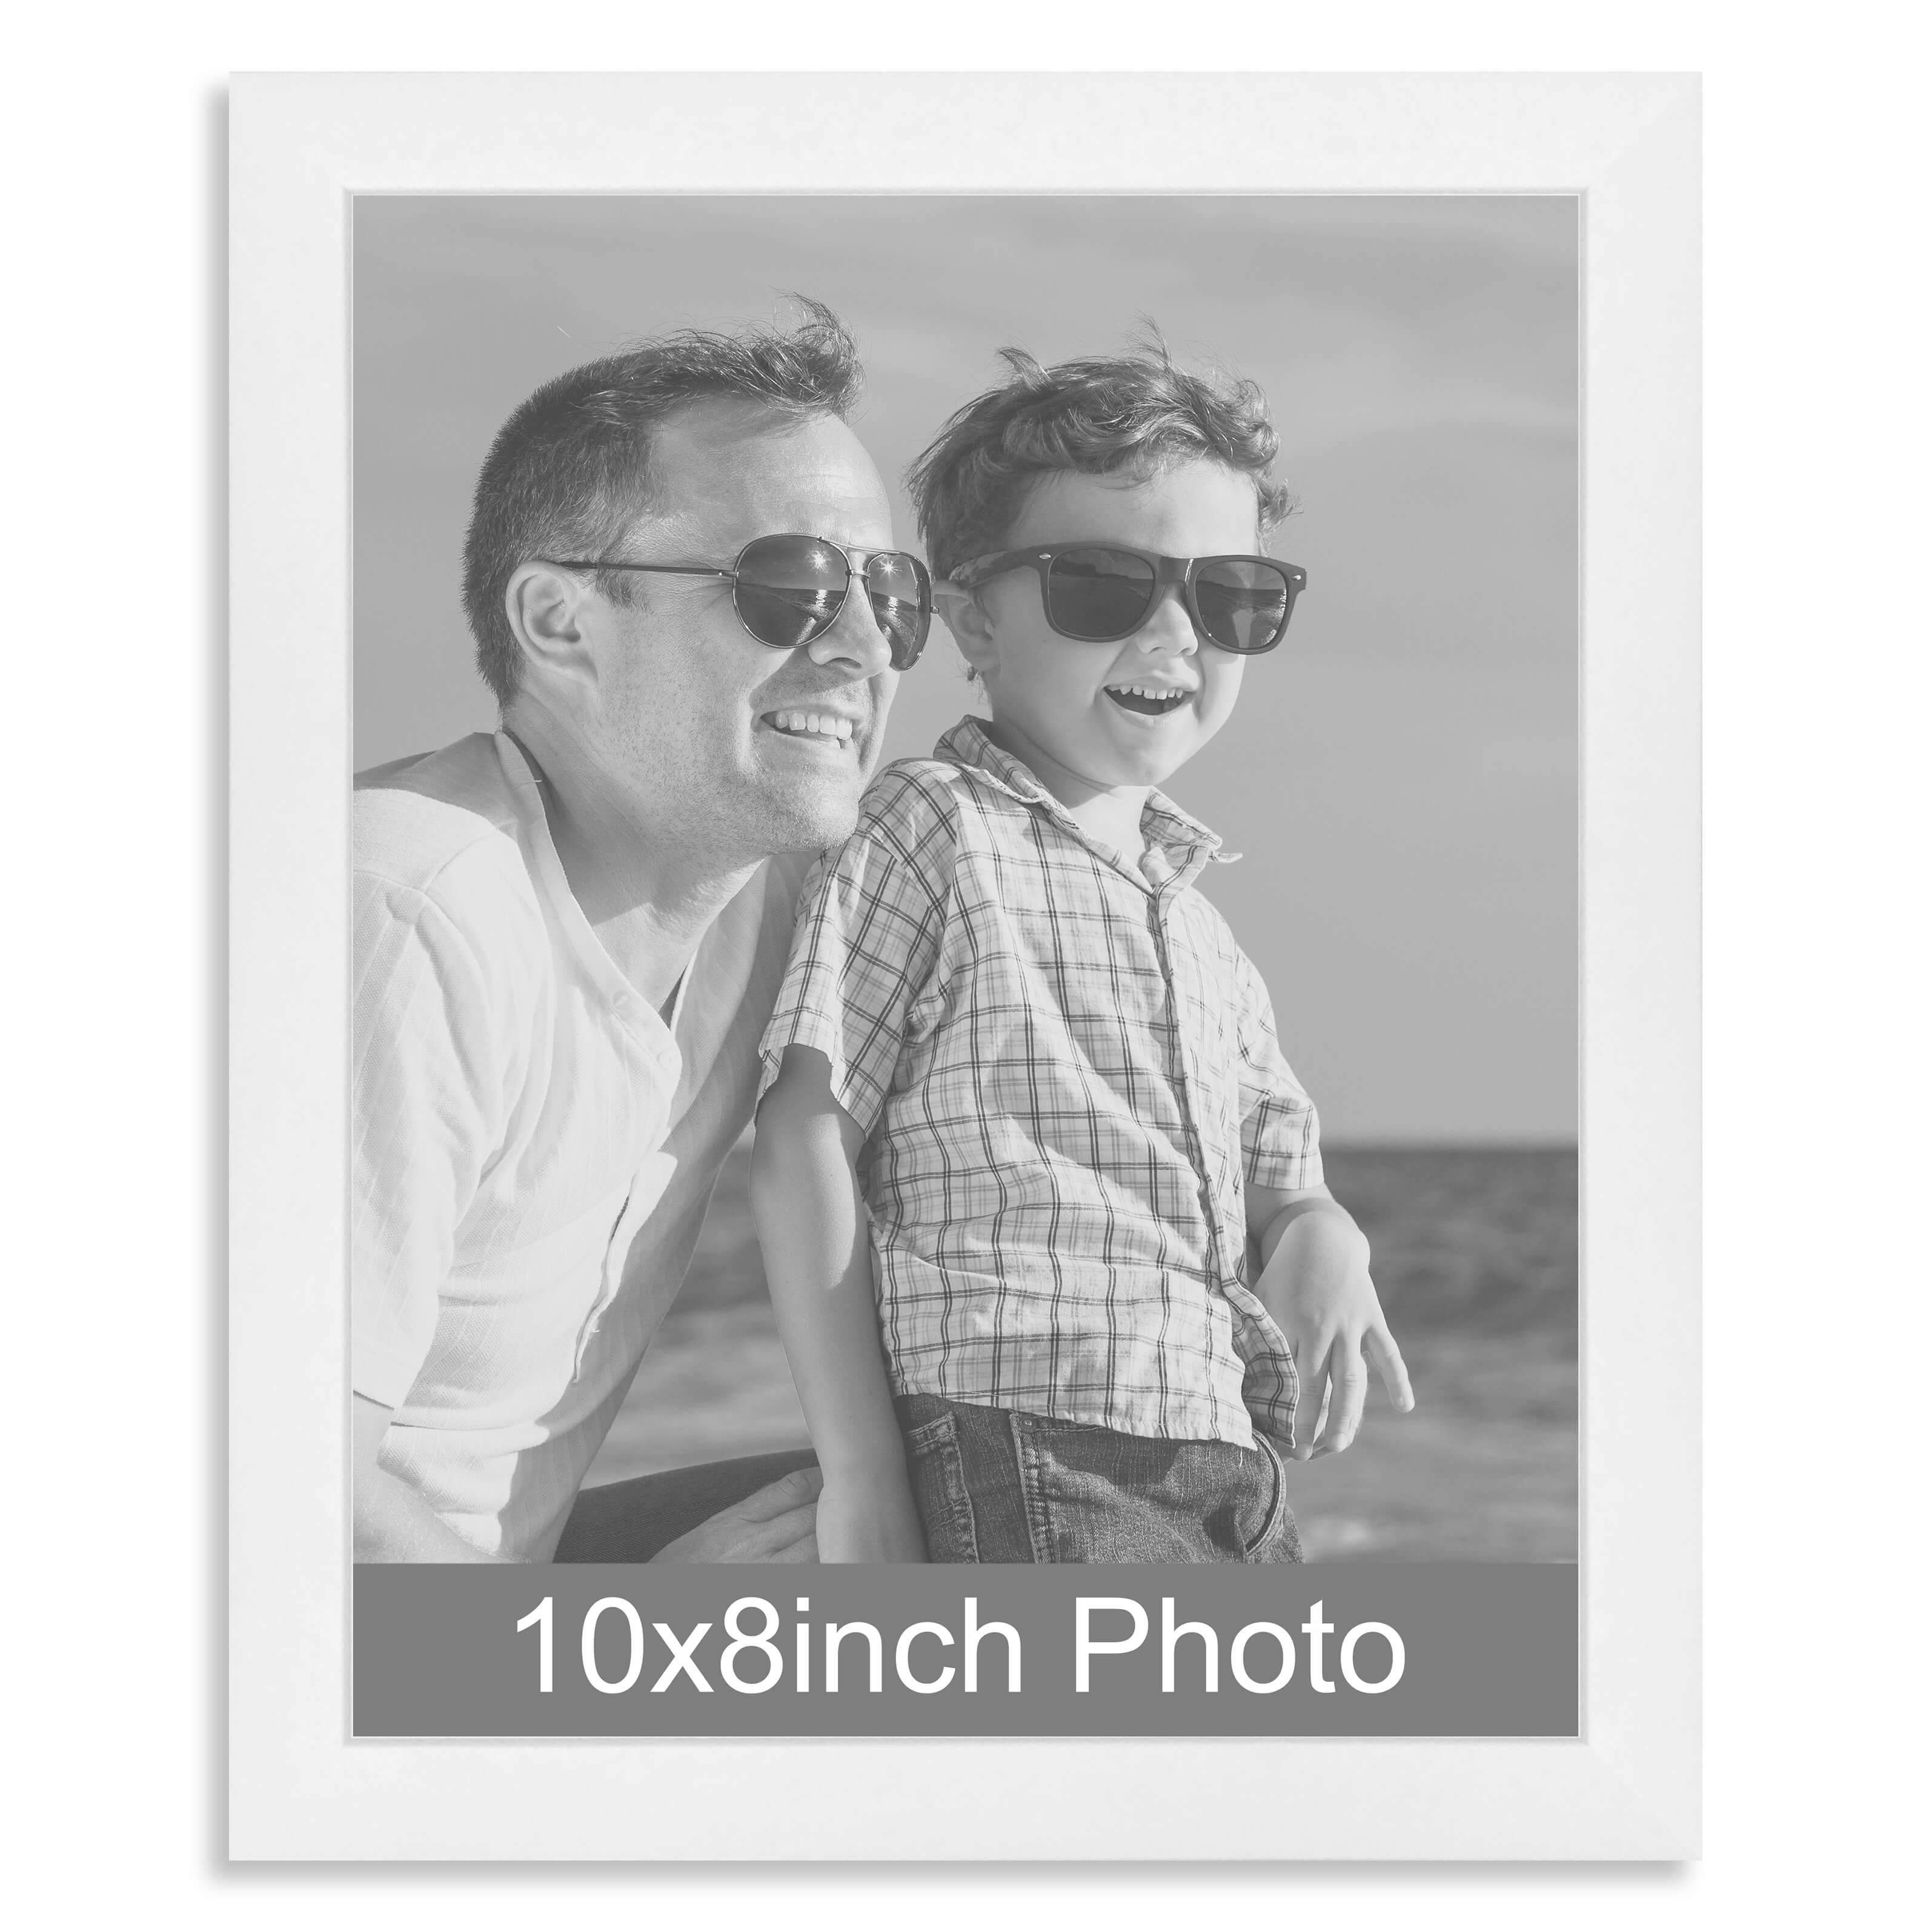 10 x 8inch White Wooden Photo Frame for a 10×8/8x10in image